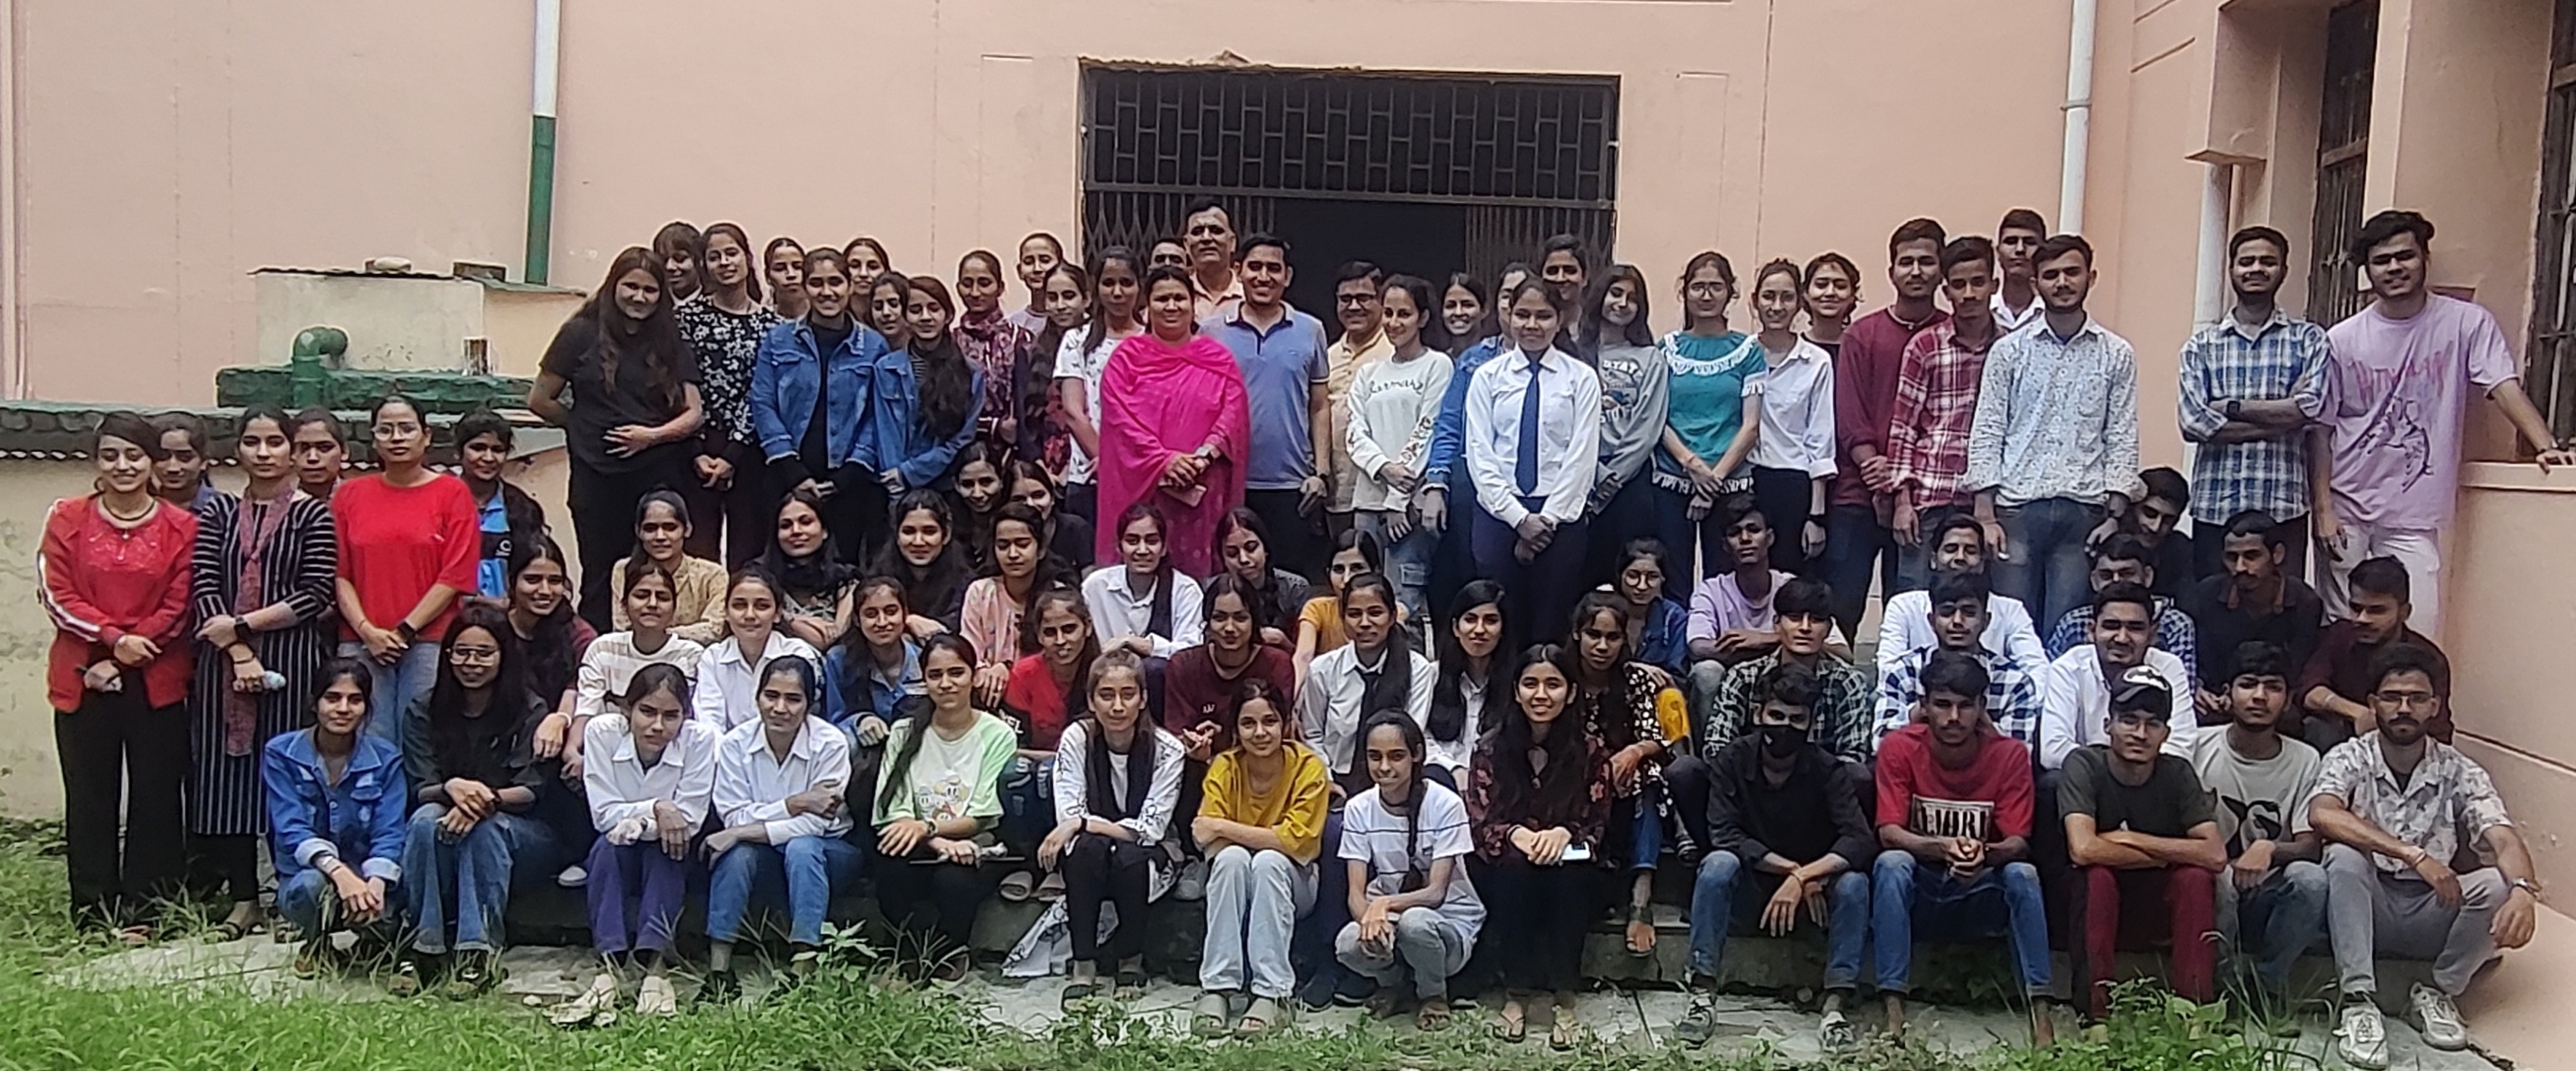 Chemistry Department Group Photo